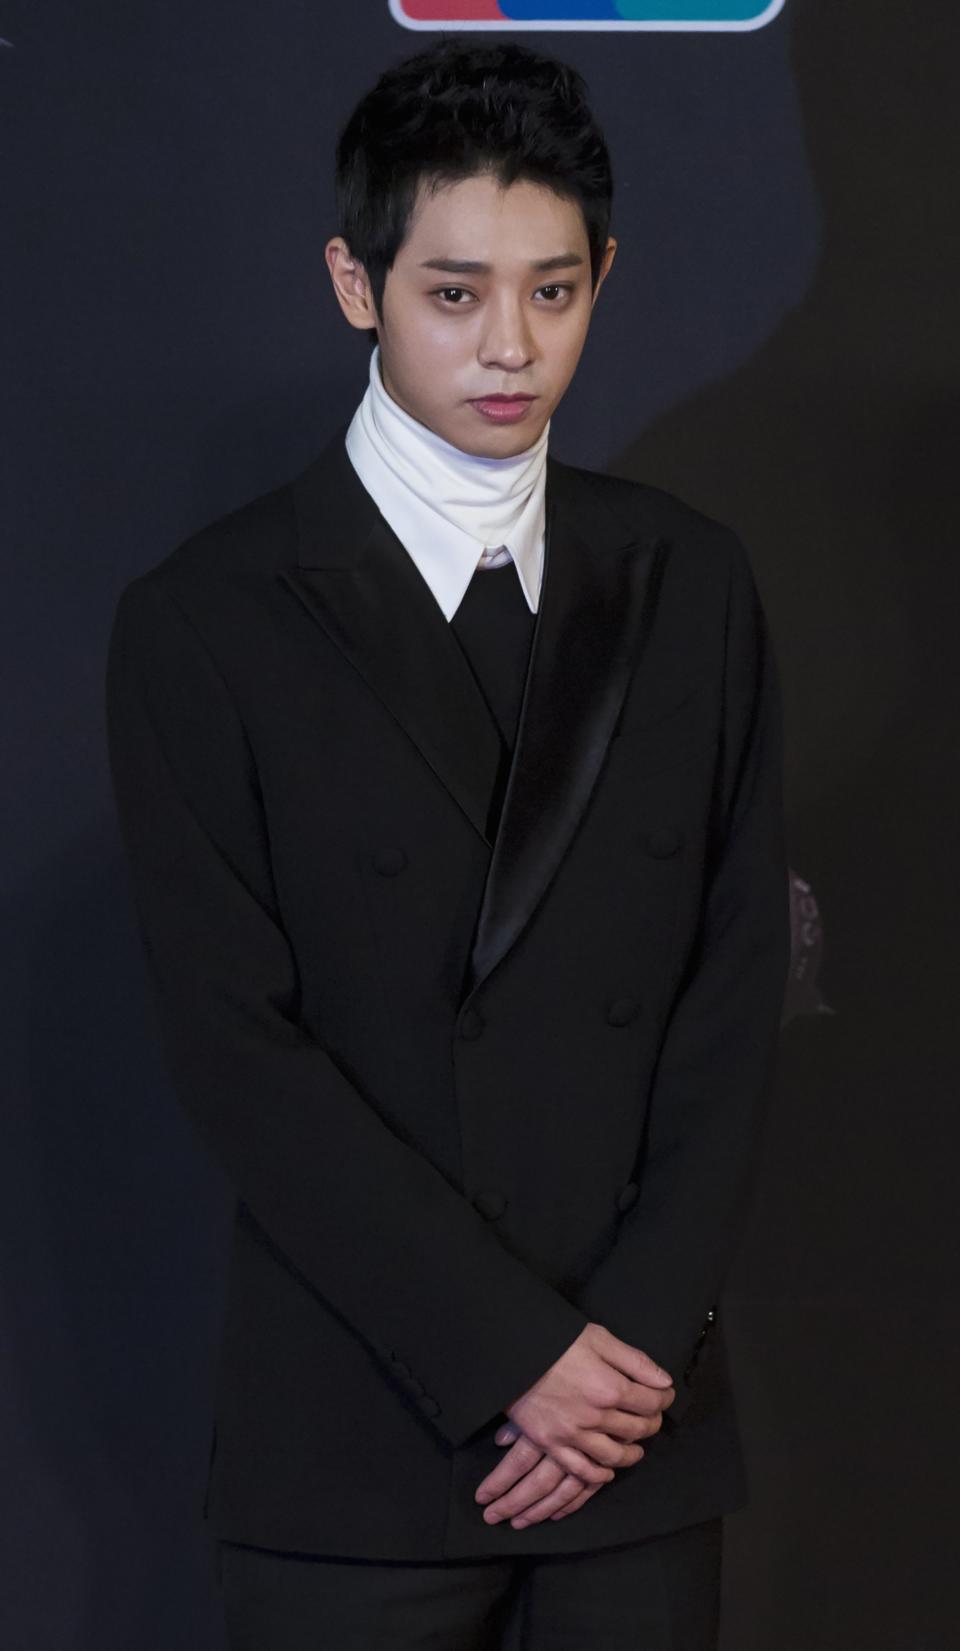 South Korean singer Jung Joon-young poses on the red carpet as he attends the 2014 Mnet Asian Music Awards (MAMA) in Hong Kong